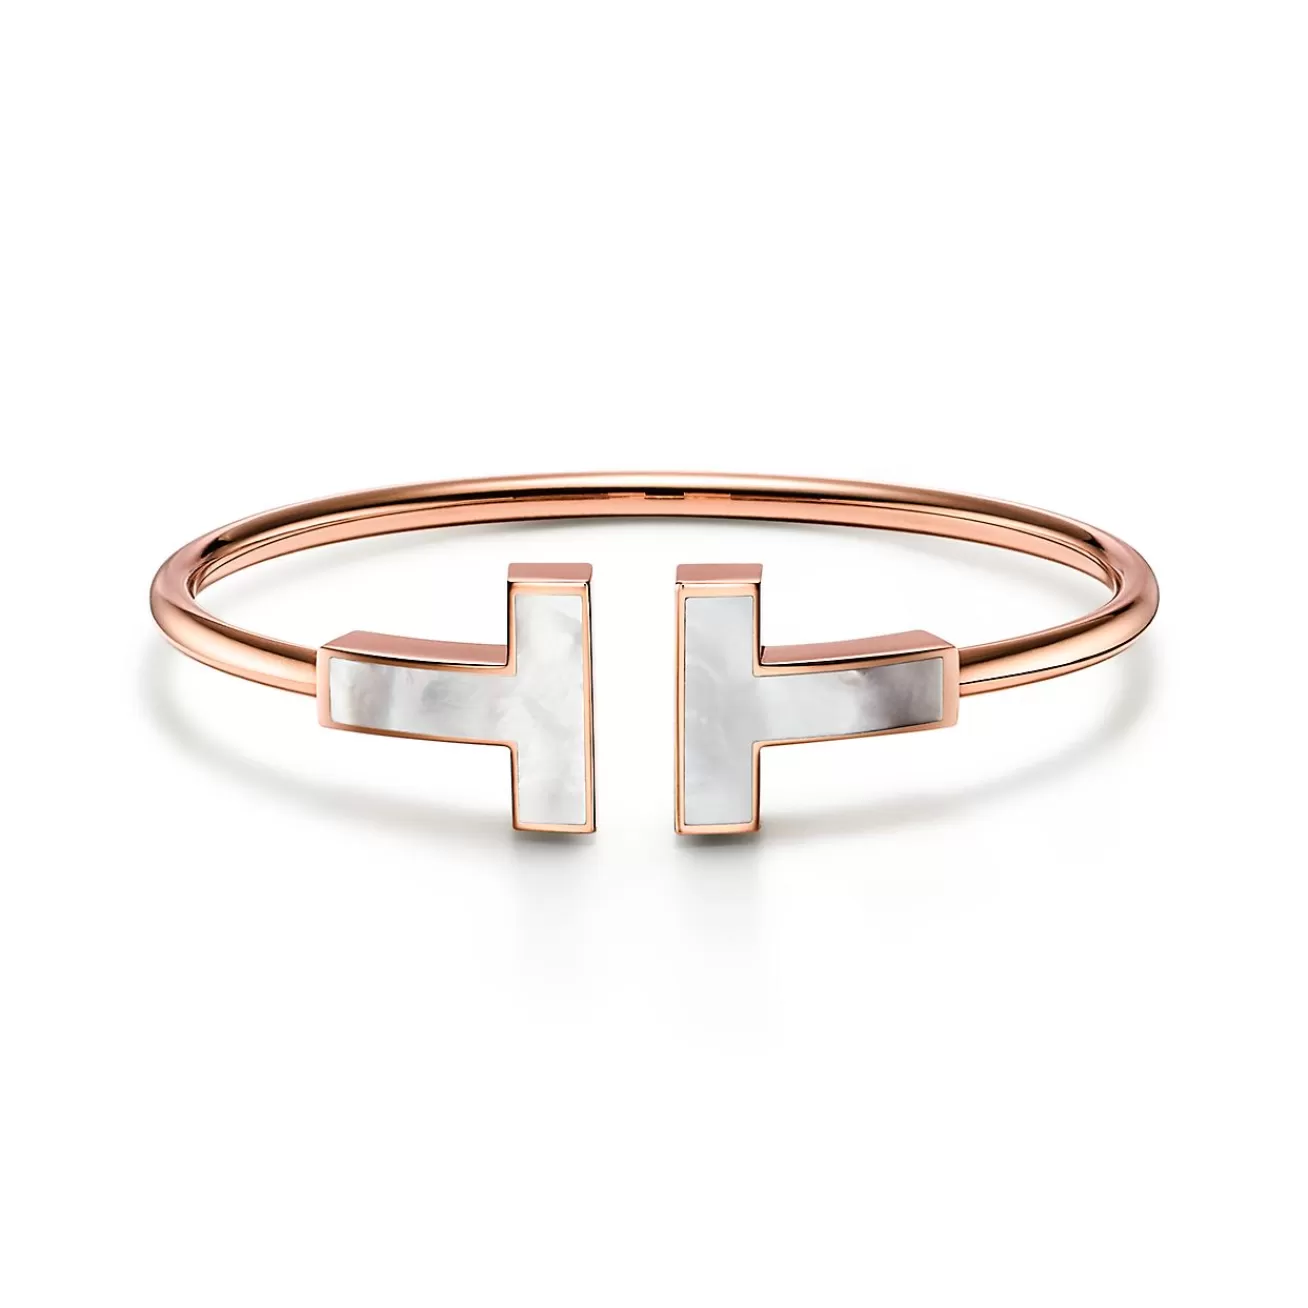 Tiffany & Co. Tiffany T Wire Bracelet in Rose Gold with Mother-of-pearl, Wide | ^ Bracelets | Rose Gold Jewelry